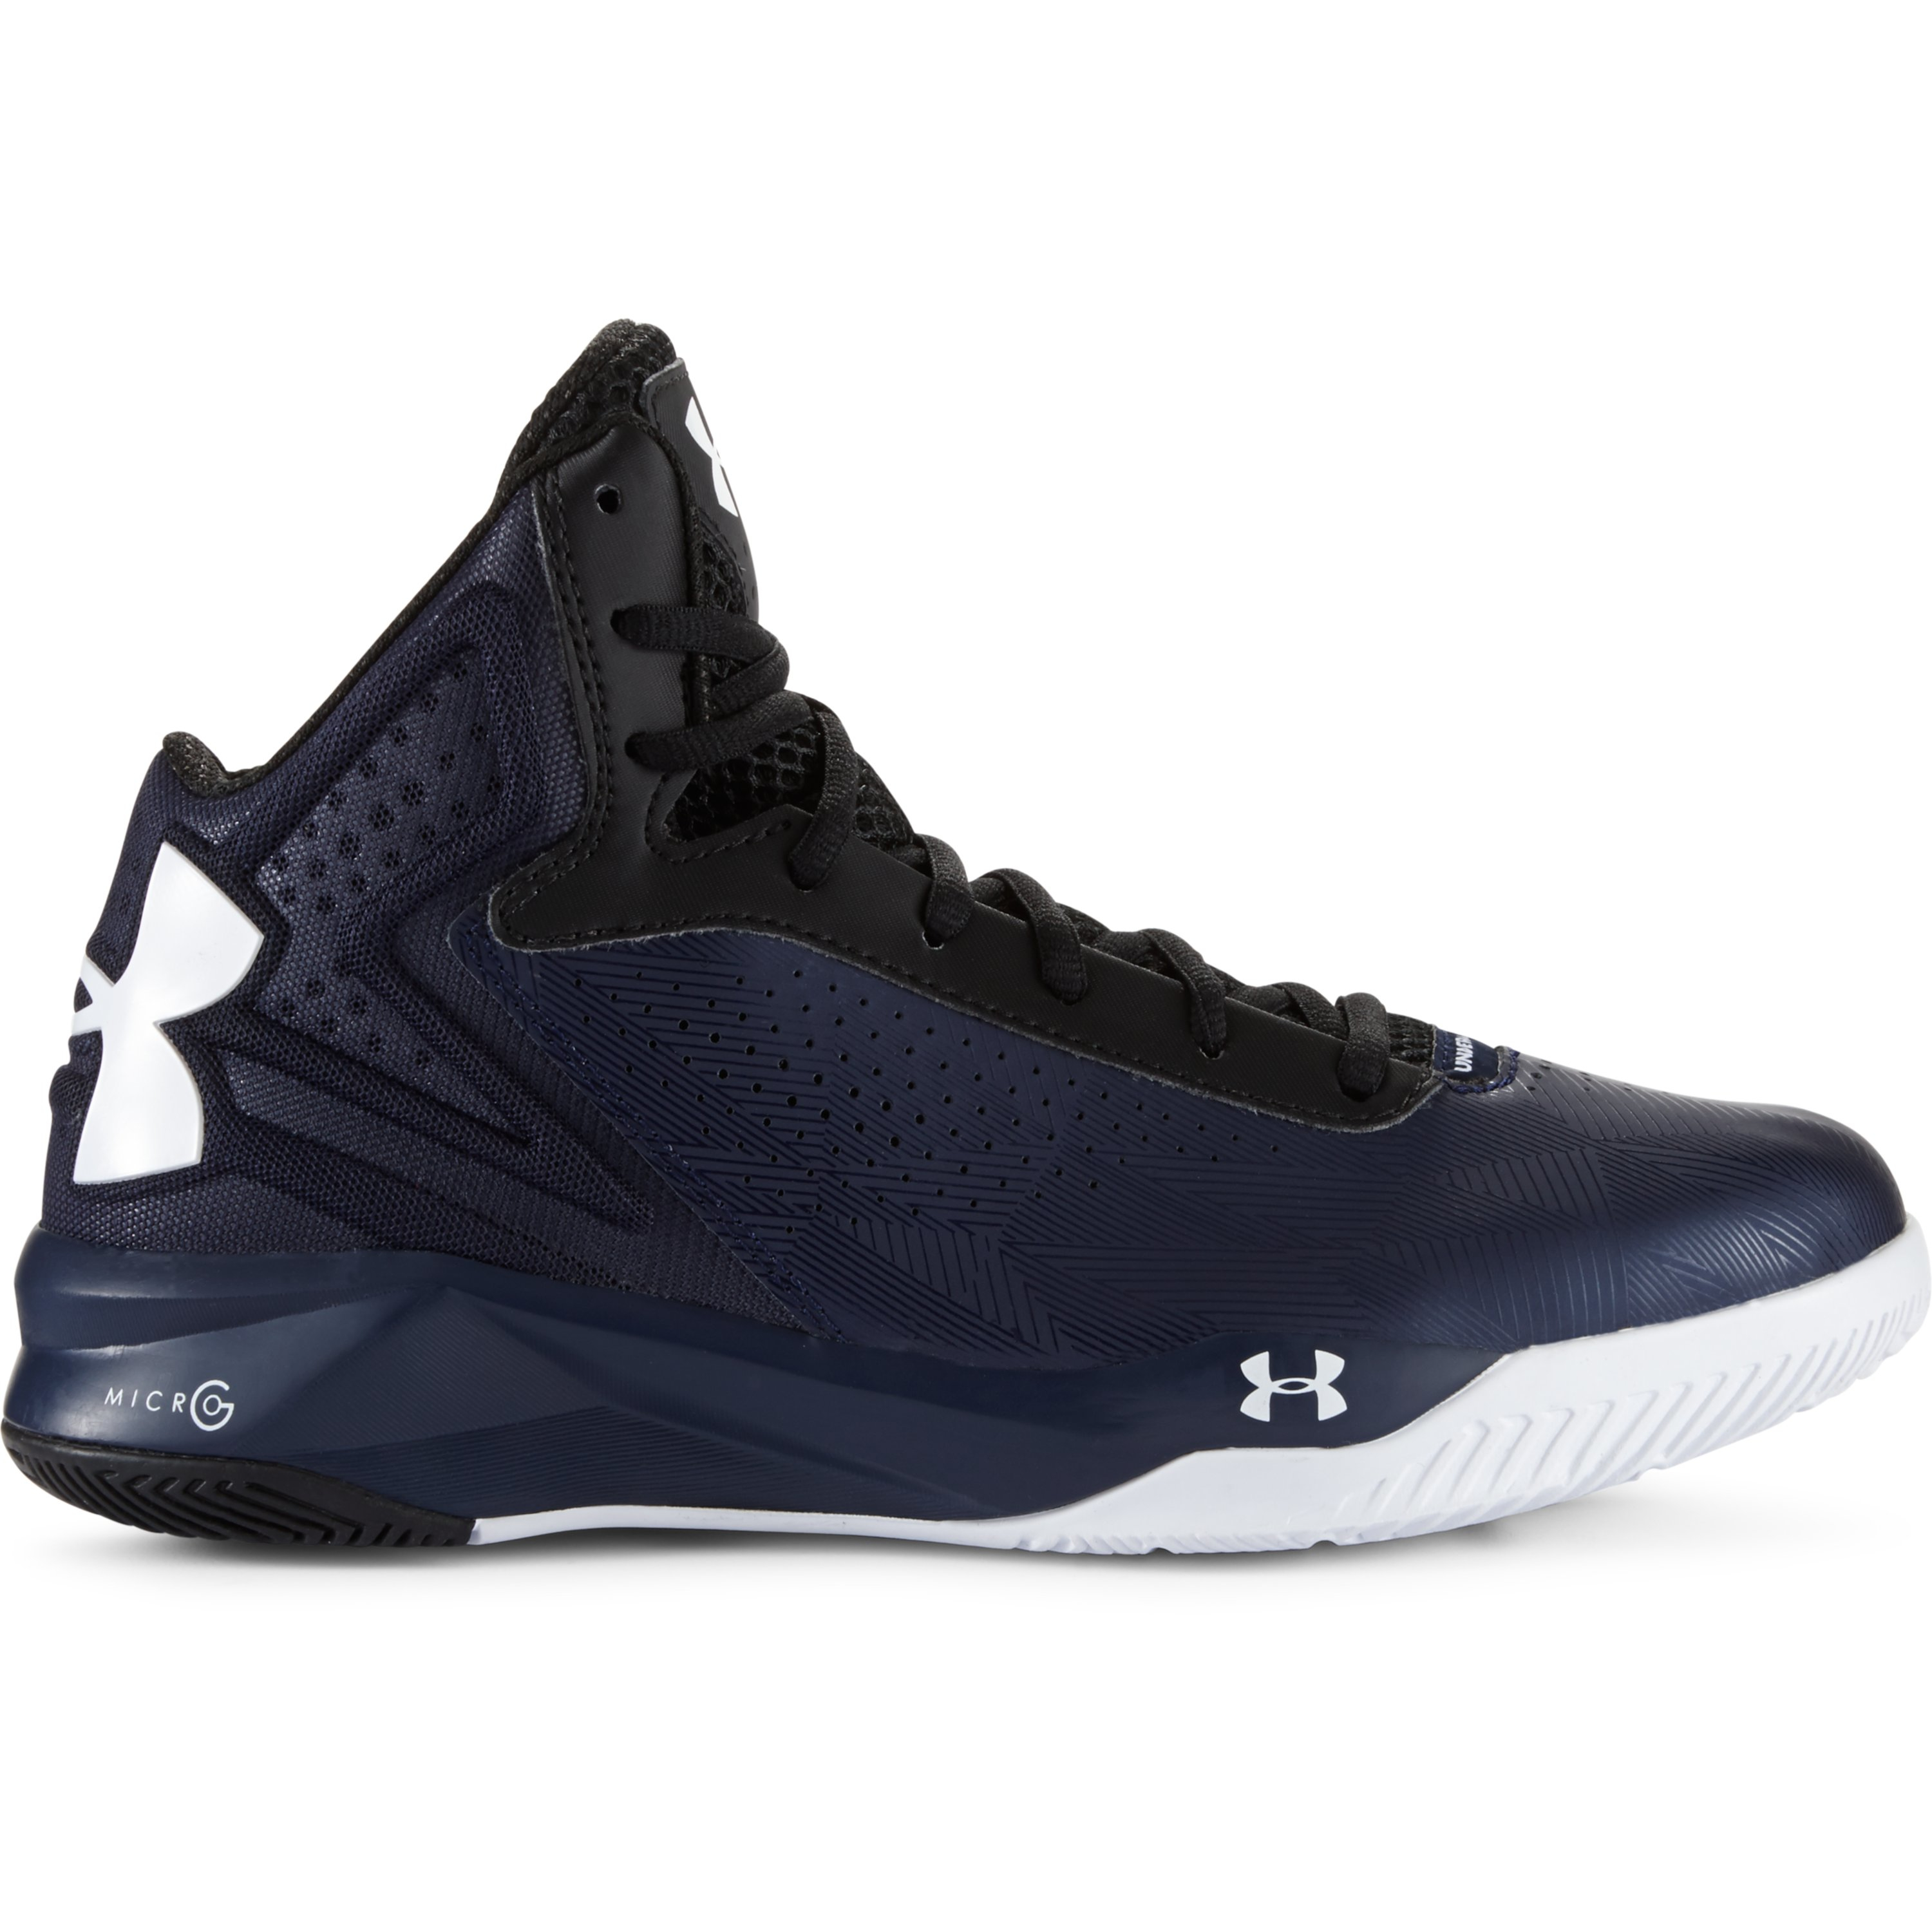 Lyst - Under Armour Women's Ua Micro G® Torch Basketball Shoes in Blue